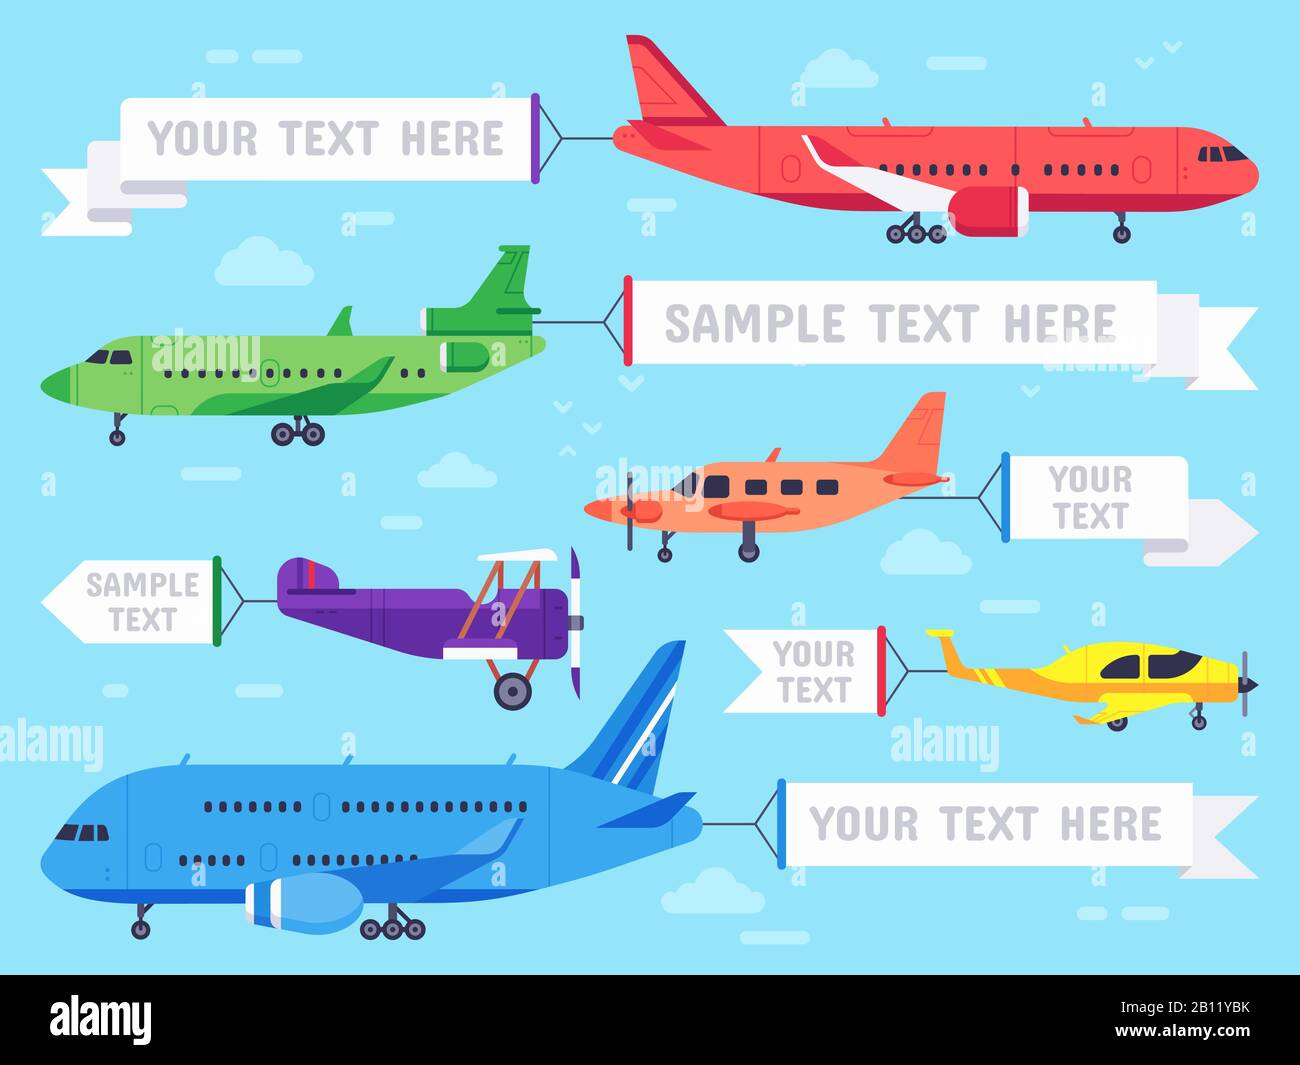 Airplane with banner. Flying ad aeroplane, aviation aircraft banners and airline plane ads vector illustration Stock Vector